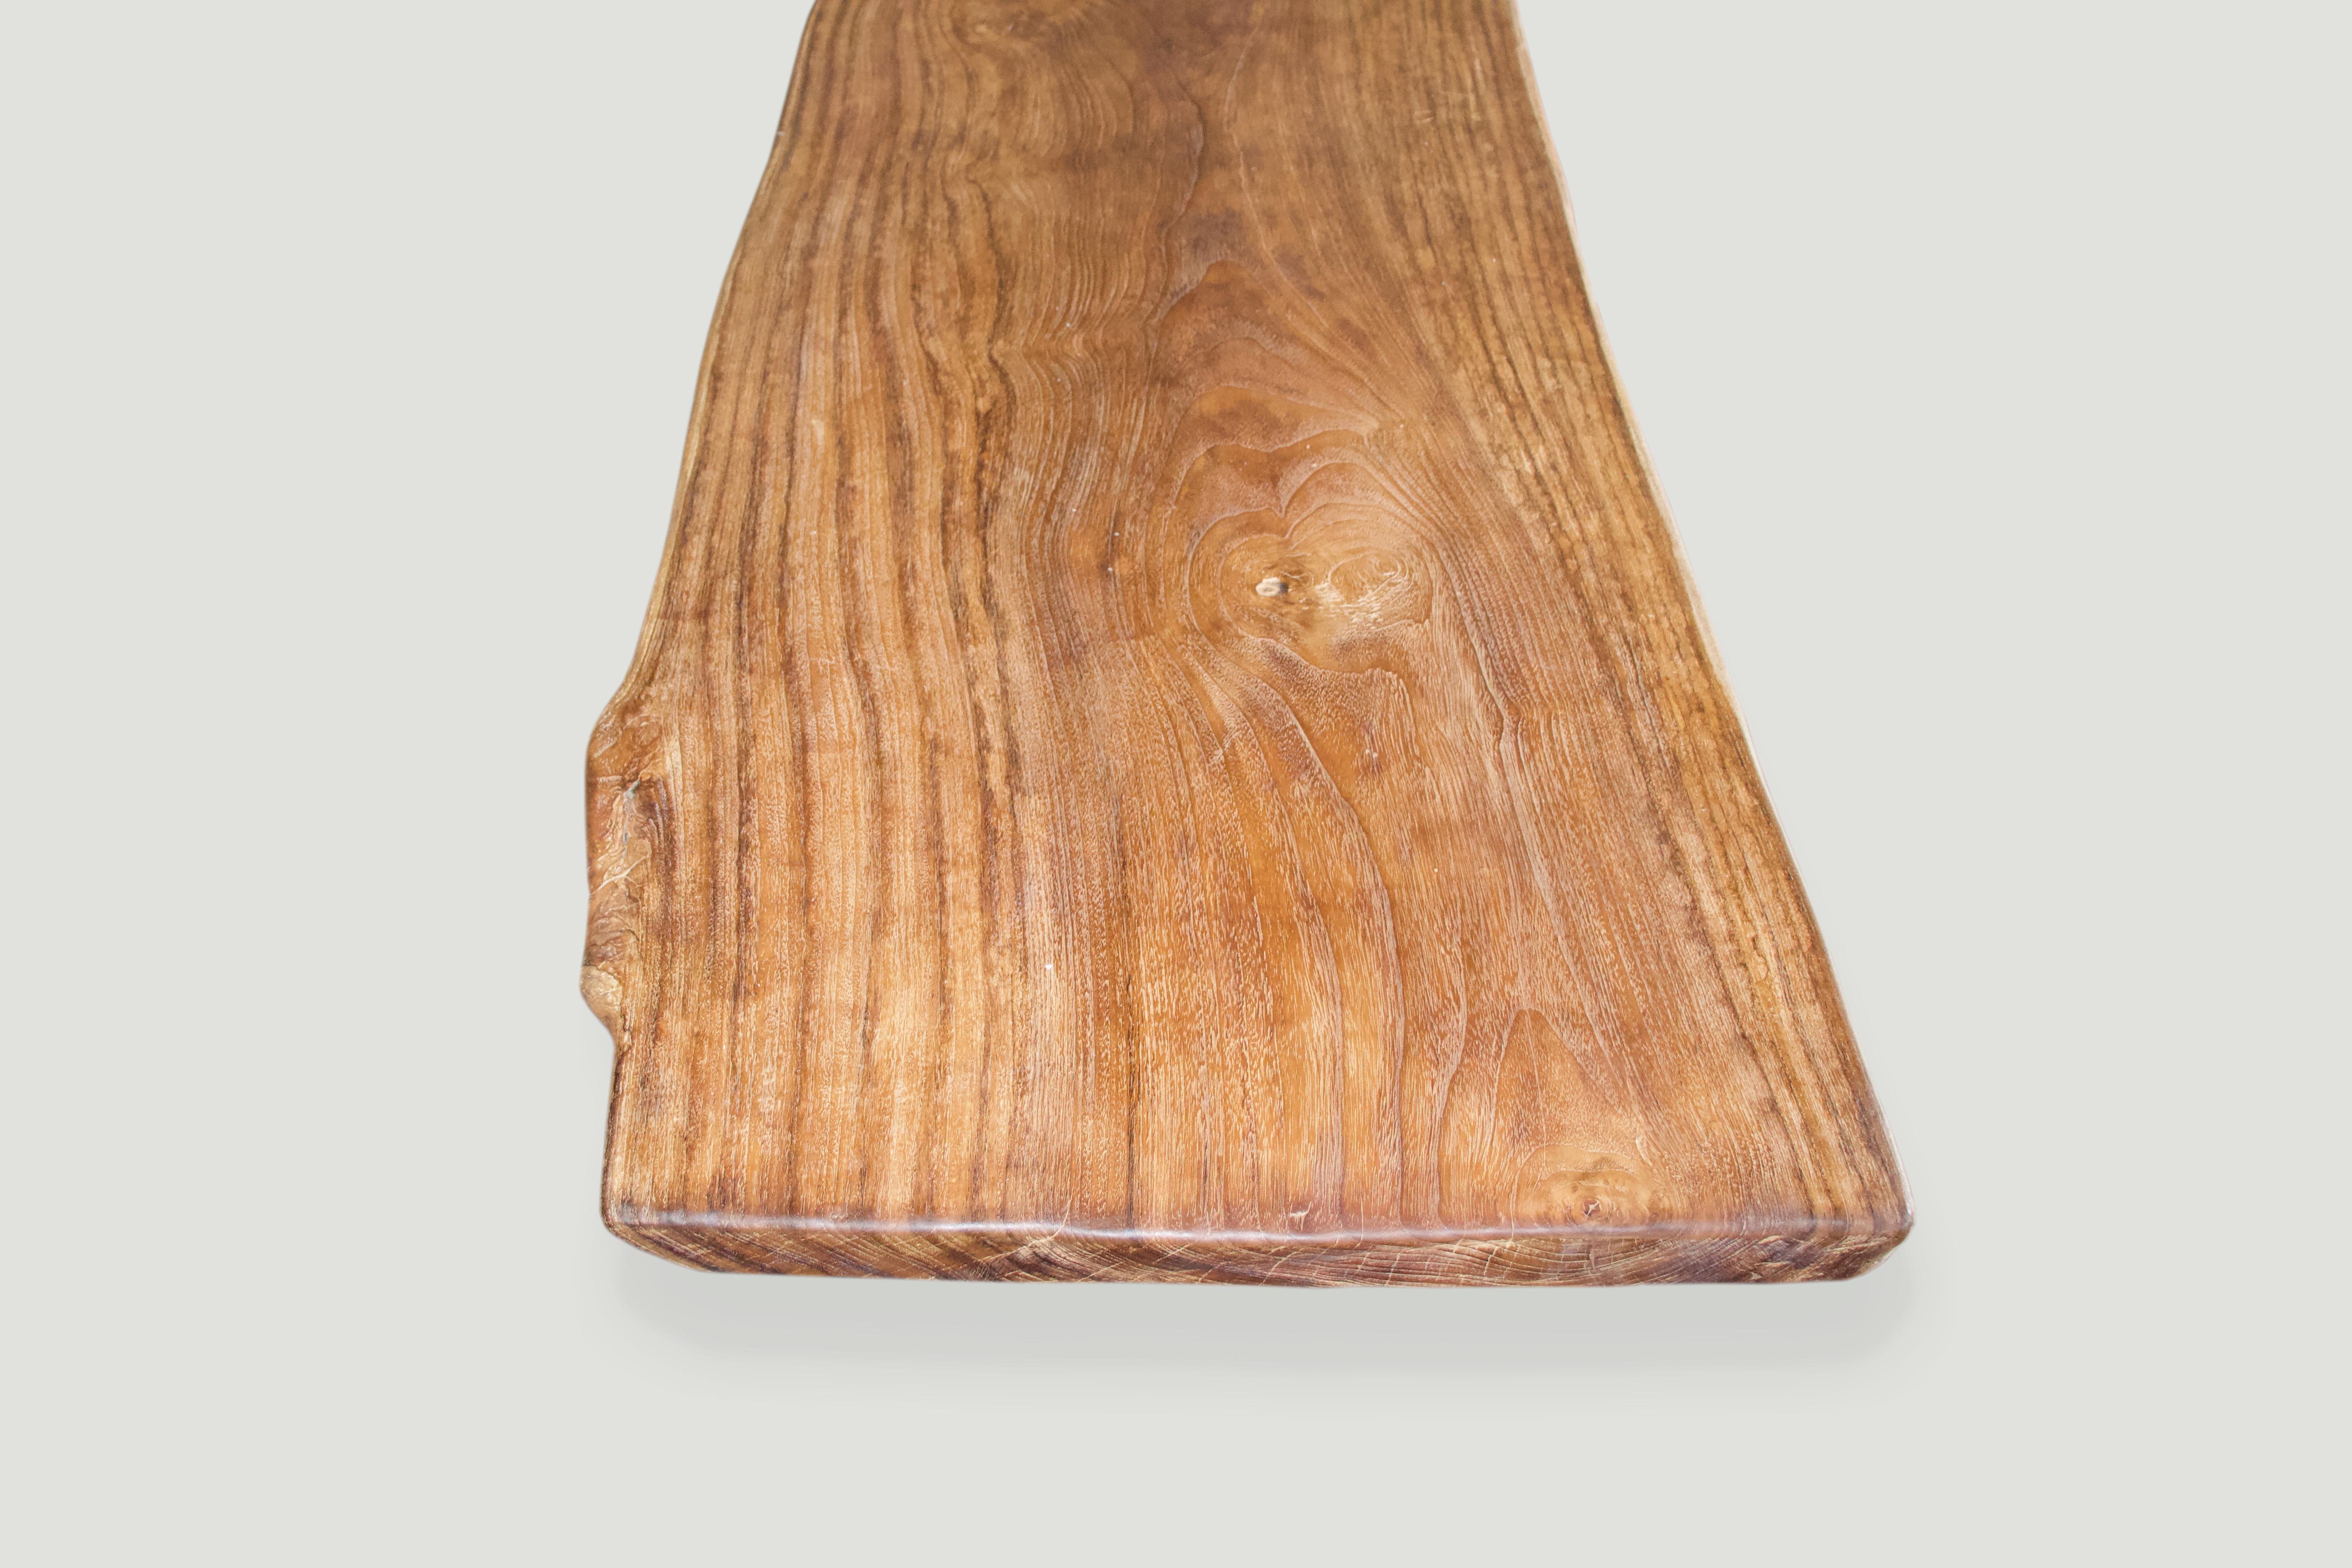 Andrianna Shamaris Midcentury Style Teak Wood Coffee Table or Bench In Excellent Condition For Sale In New York, NY